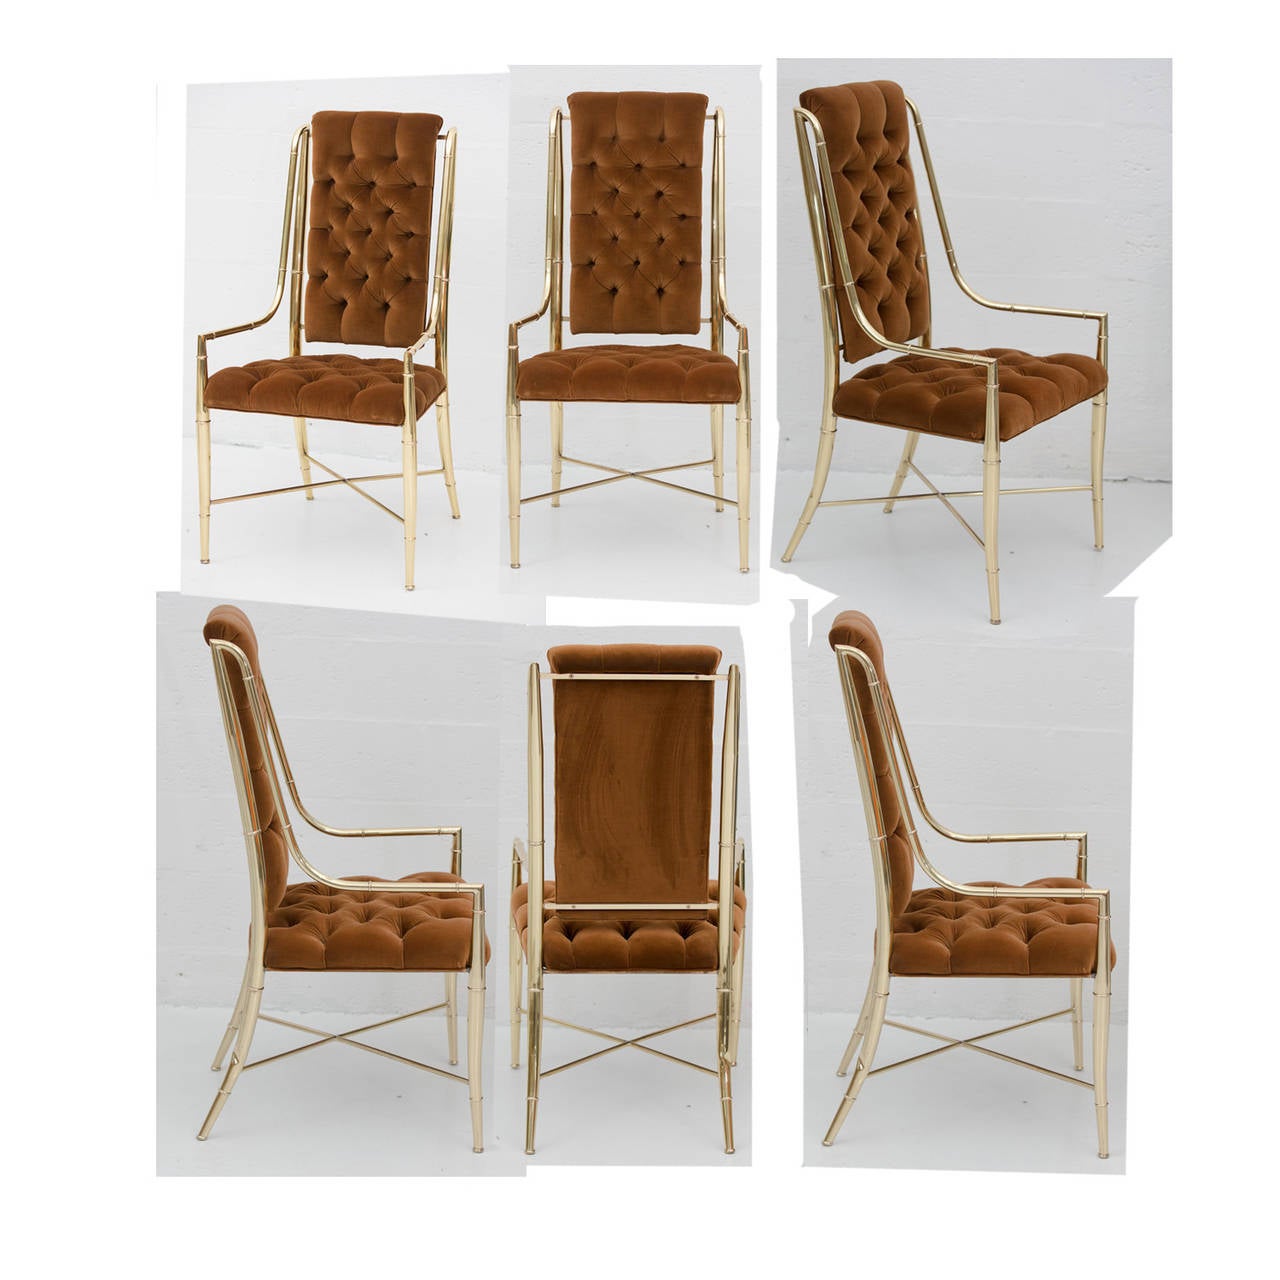 Set of six brass dining room chairs by Mastercraft,
with vintage velvet tufted upholstery.
Recently polished to perfection.
Another set in vintage brass condition
and different velvet fabric available.